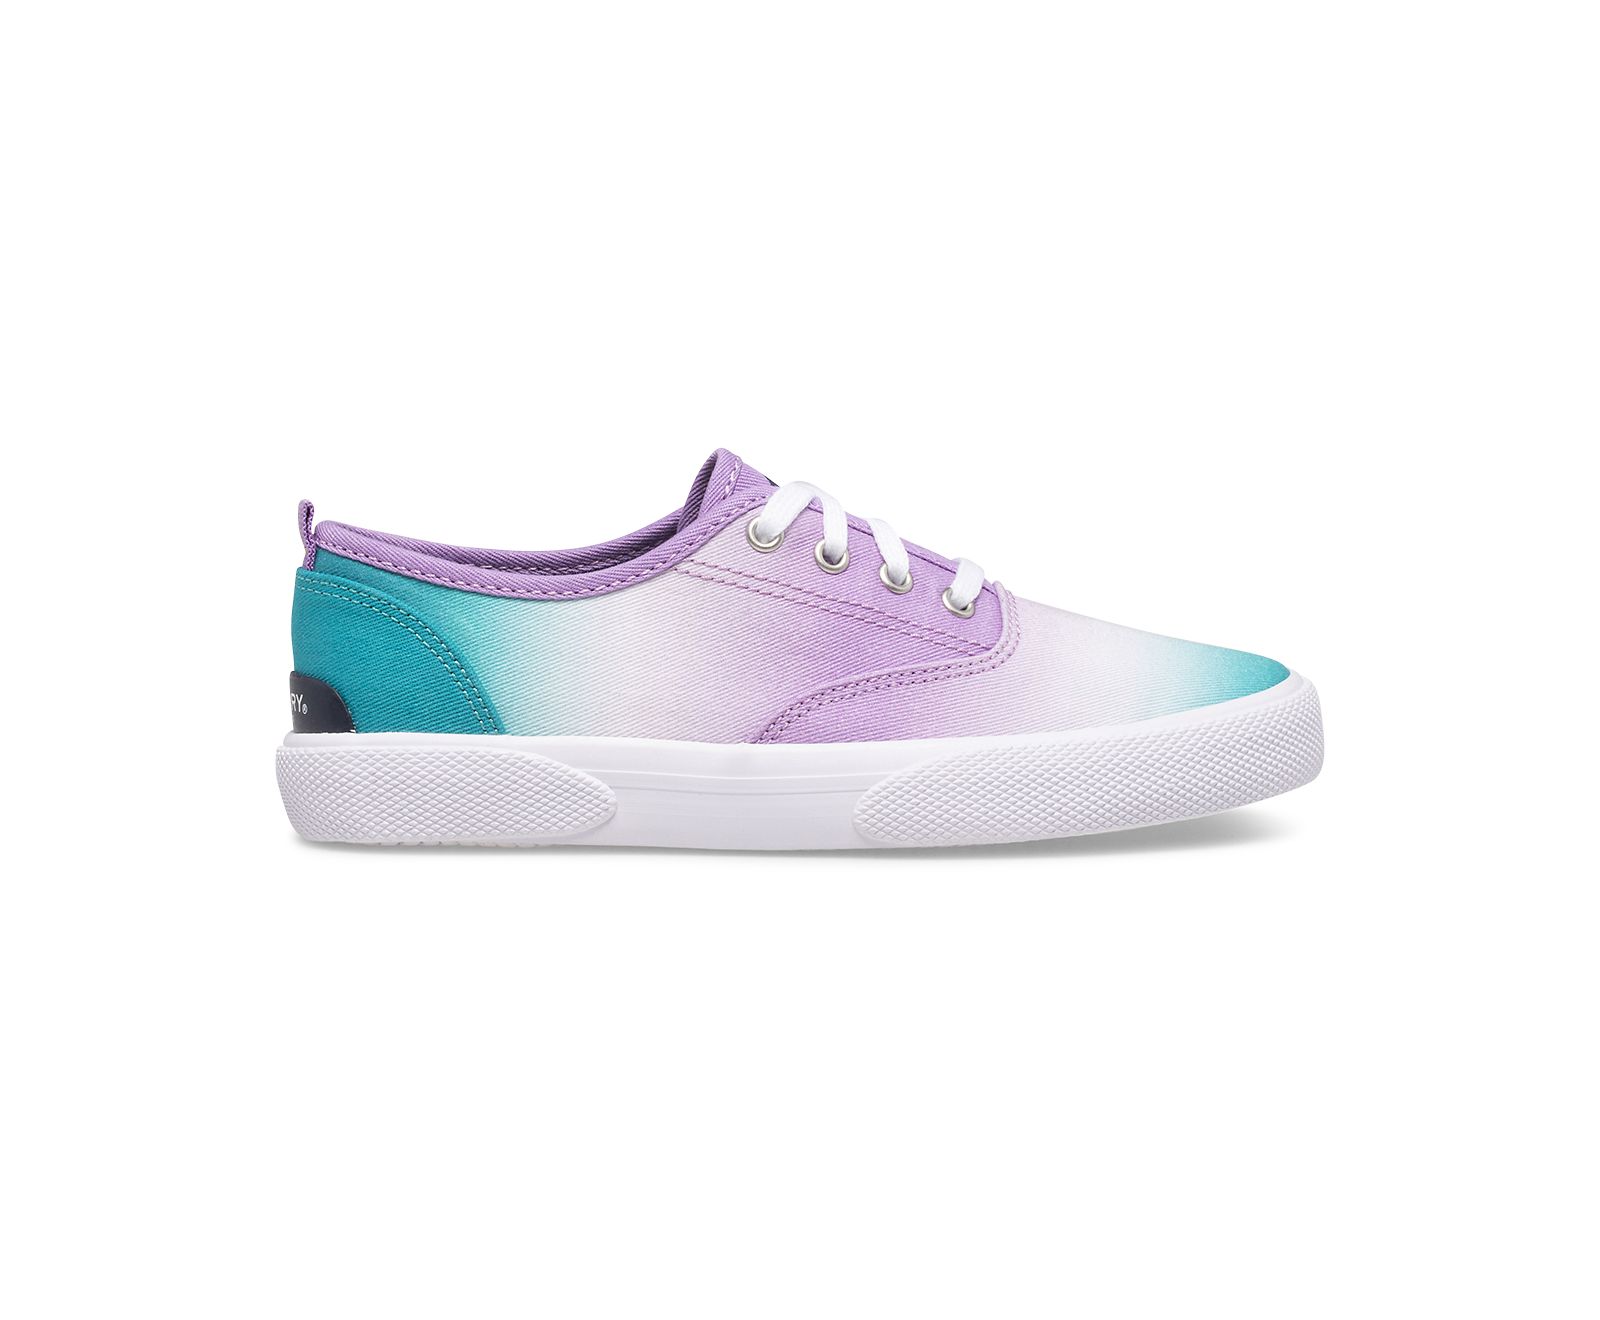 Big Kid's Pier Wave CVO Washable Sneaker - Turquoise Ombre